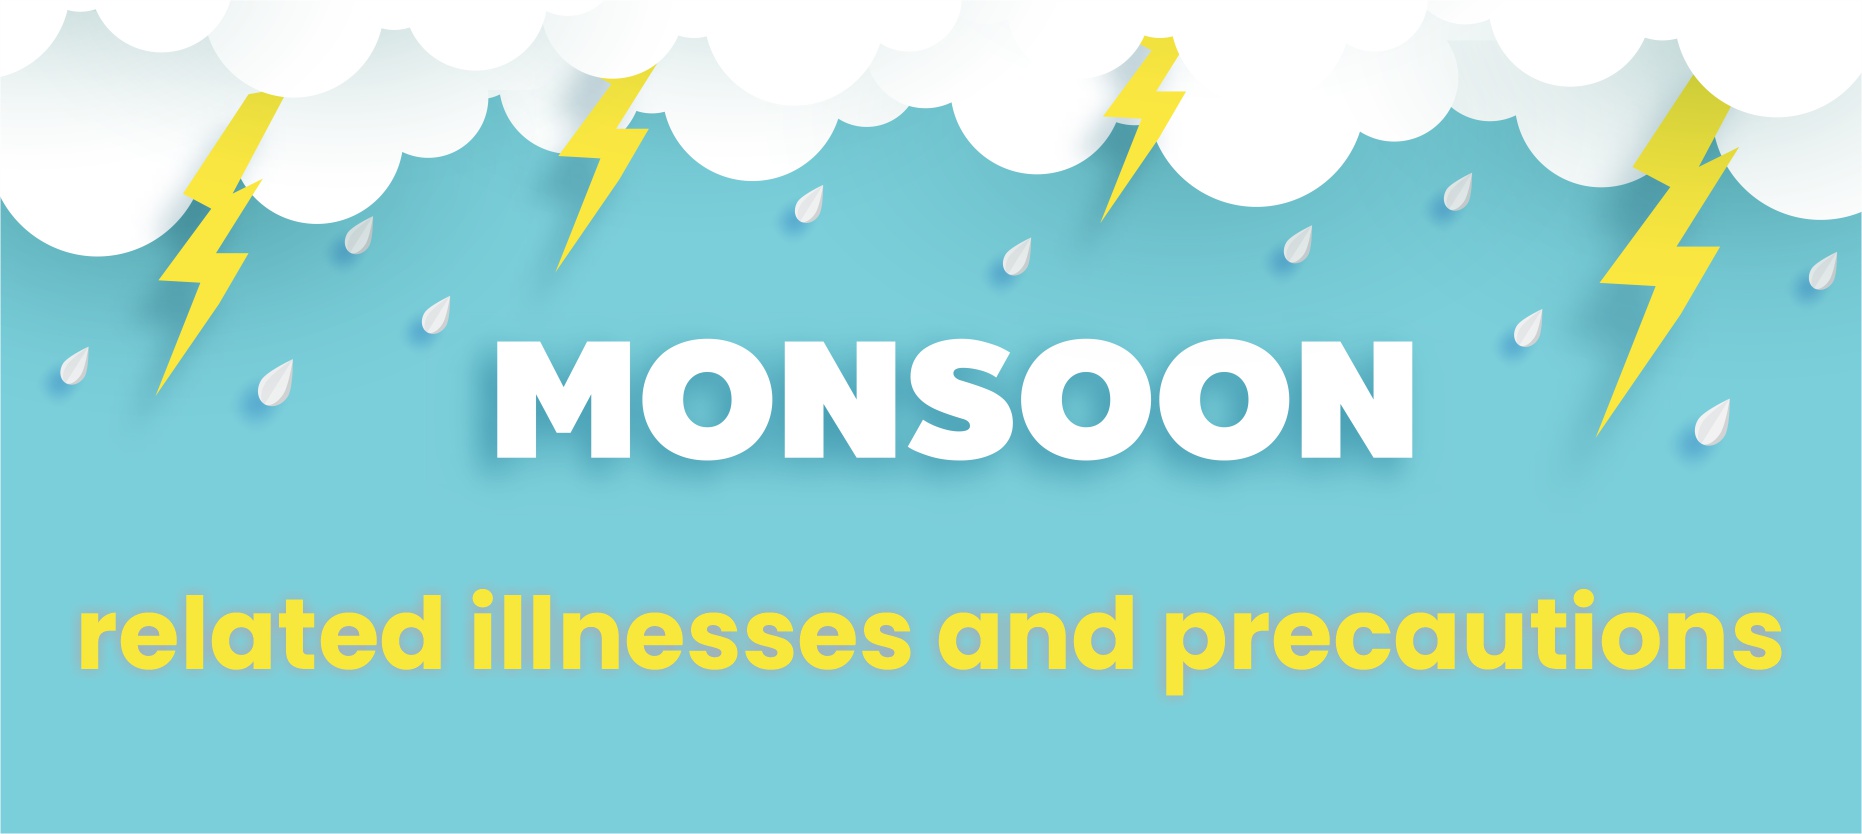 Monsoon Related Illnesses And Precautions